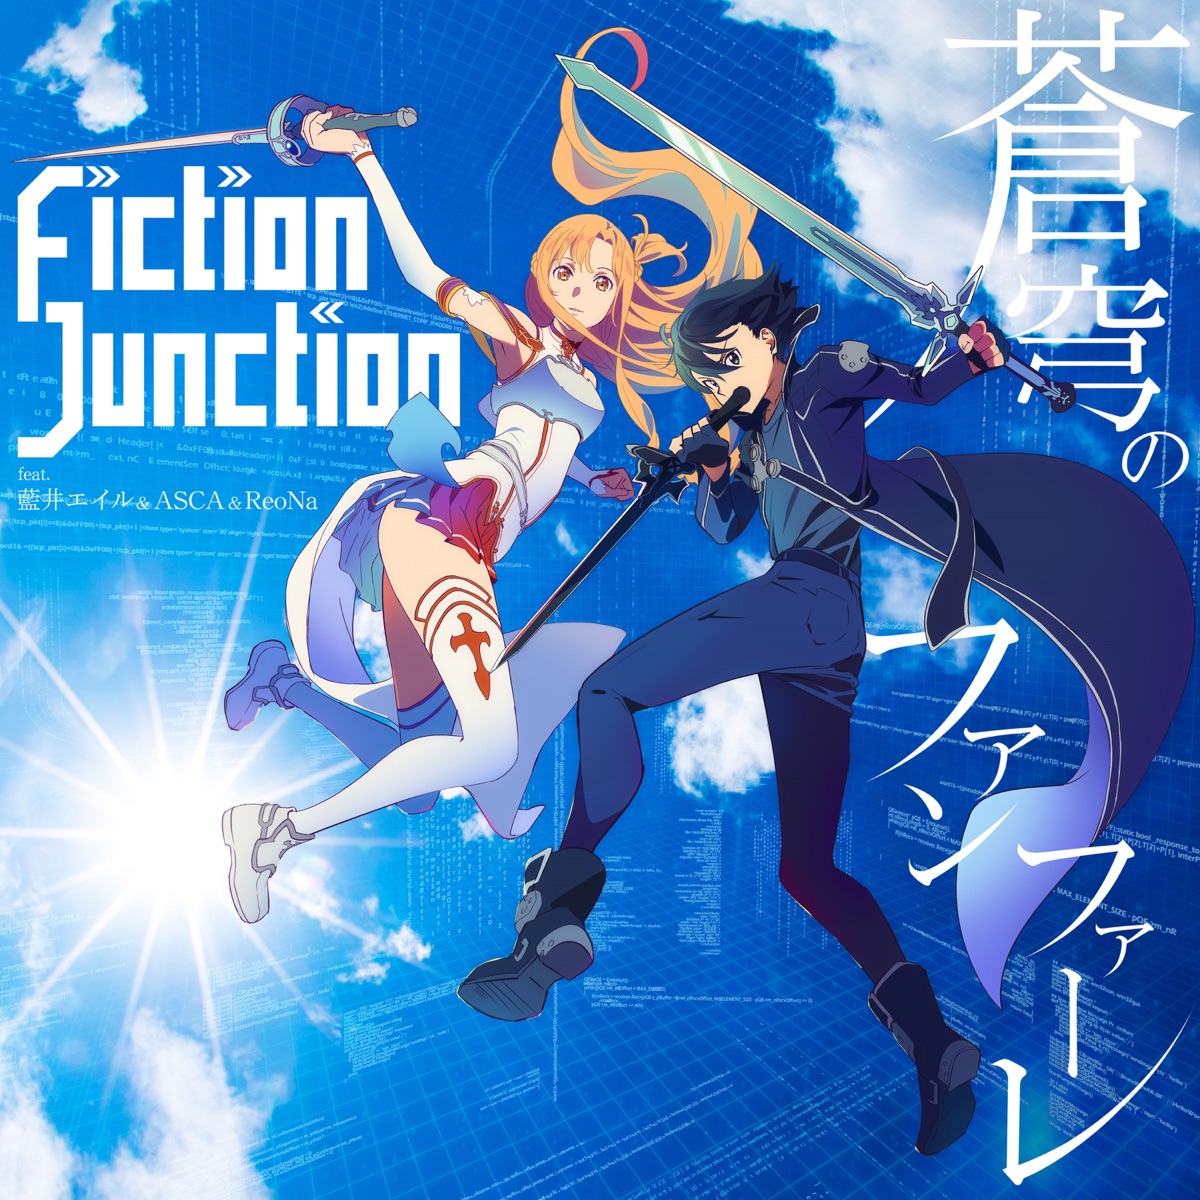 Cover art for『FictionJunction feat. Eir Aoi & ASCA & ReoNa - 蒼穹のファンファーレ』from the release『Soukyuu no Fanfare